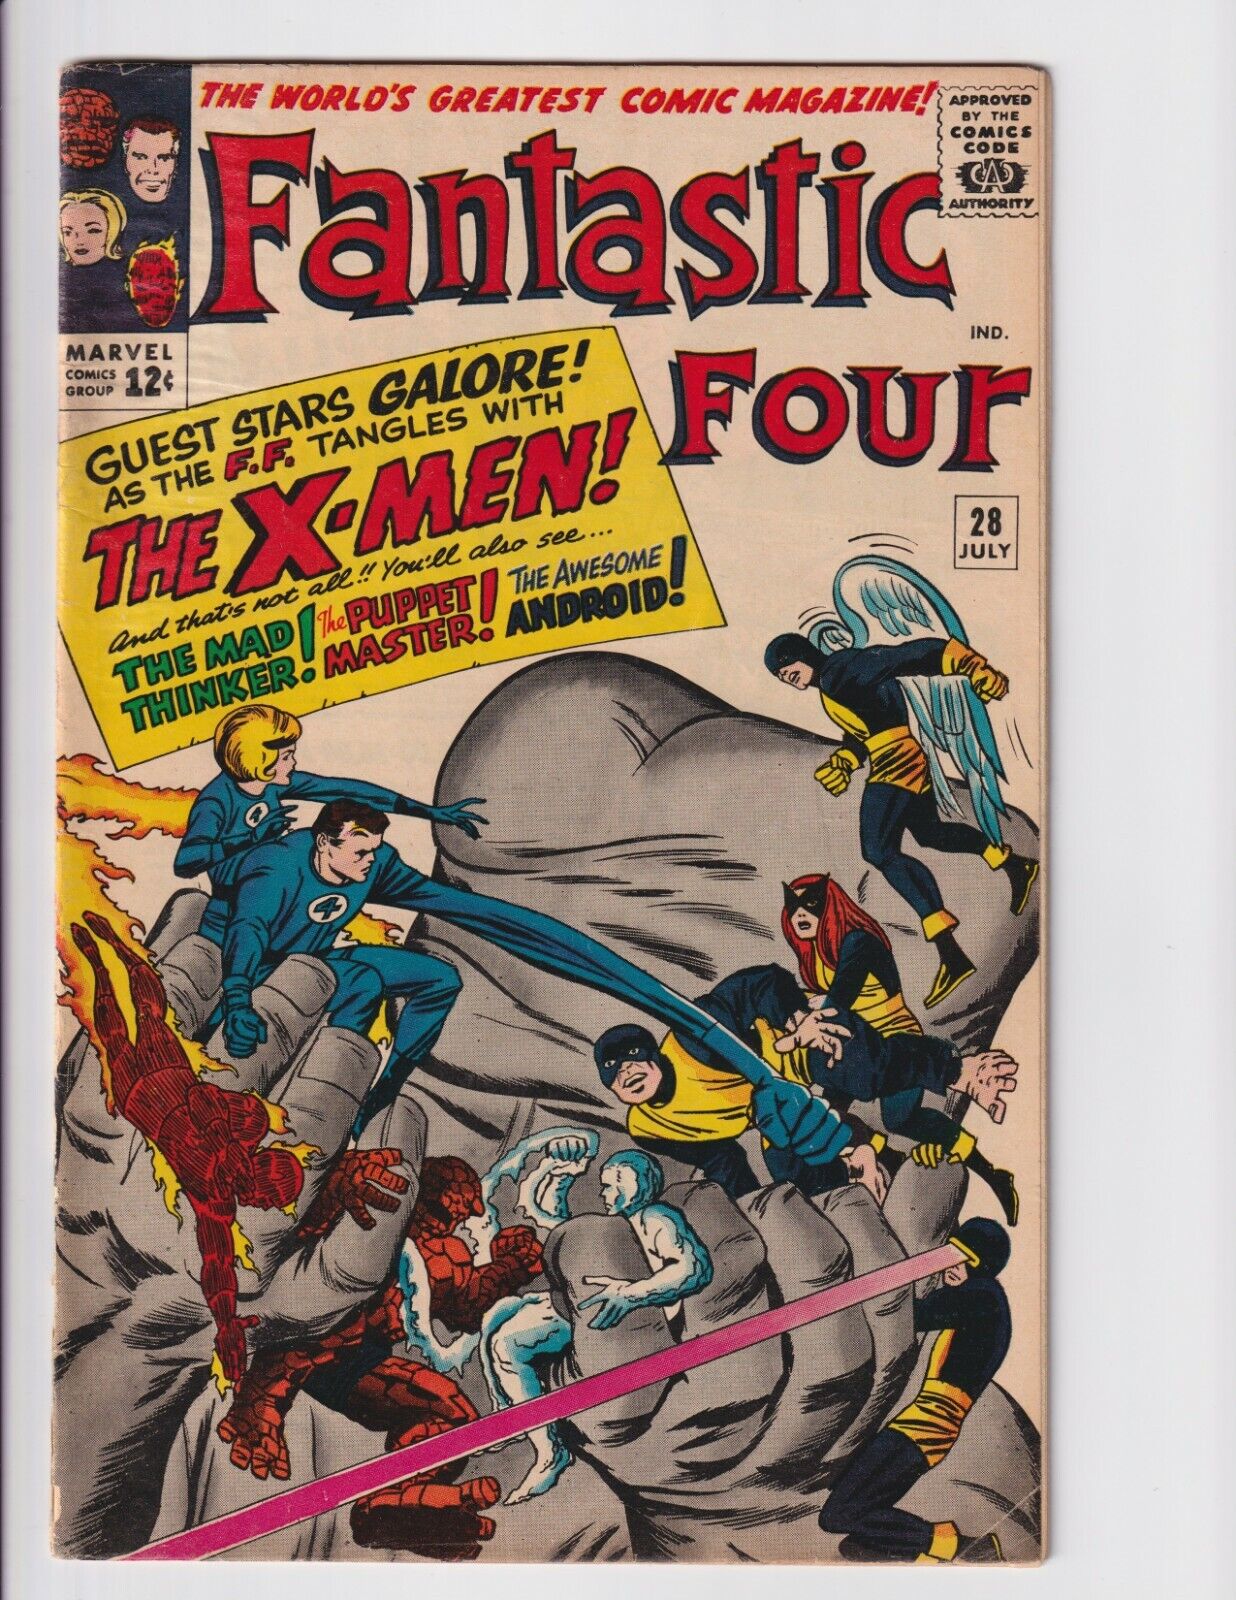 FANTASTIC FOUR #28 (1964) FN- Early X-Men Appearance - KIRBY + LEE